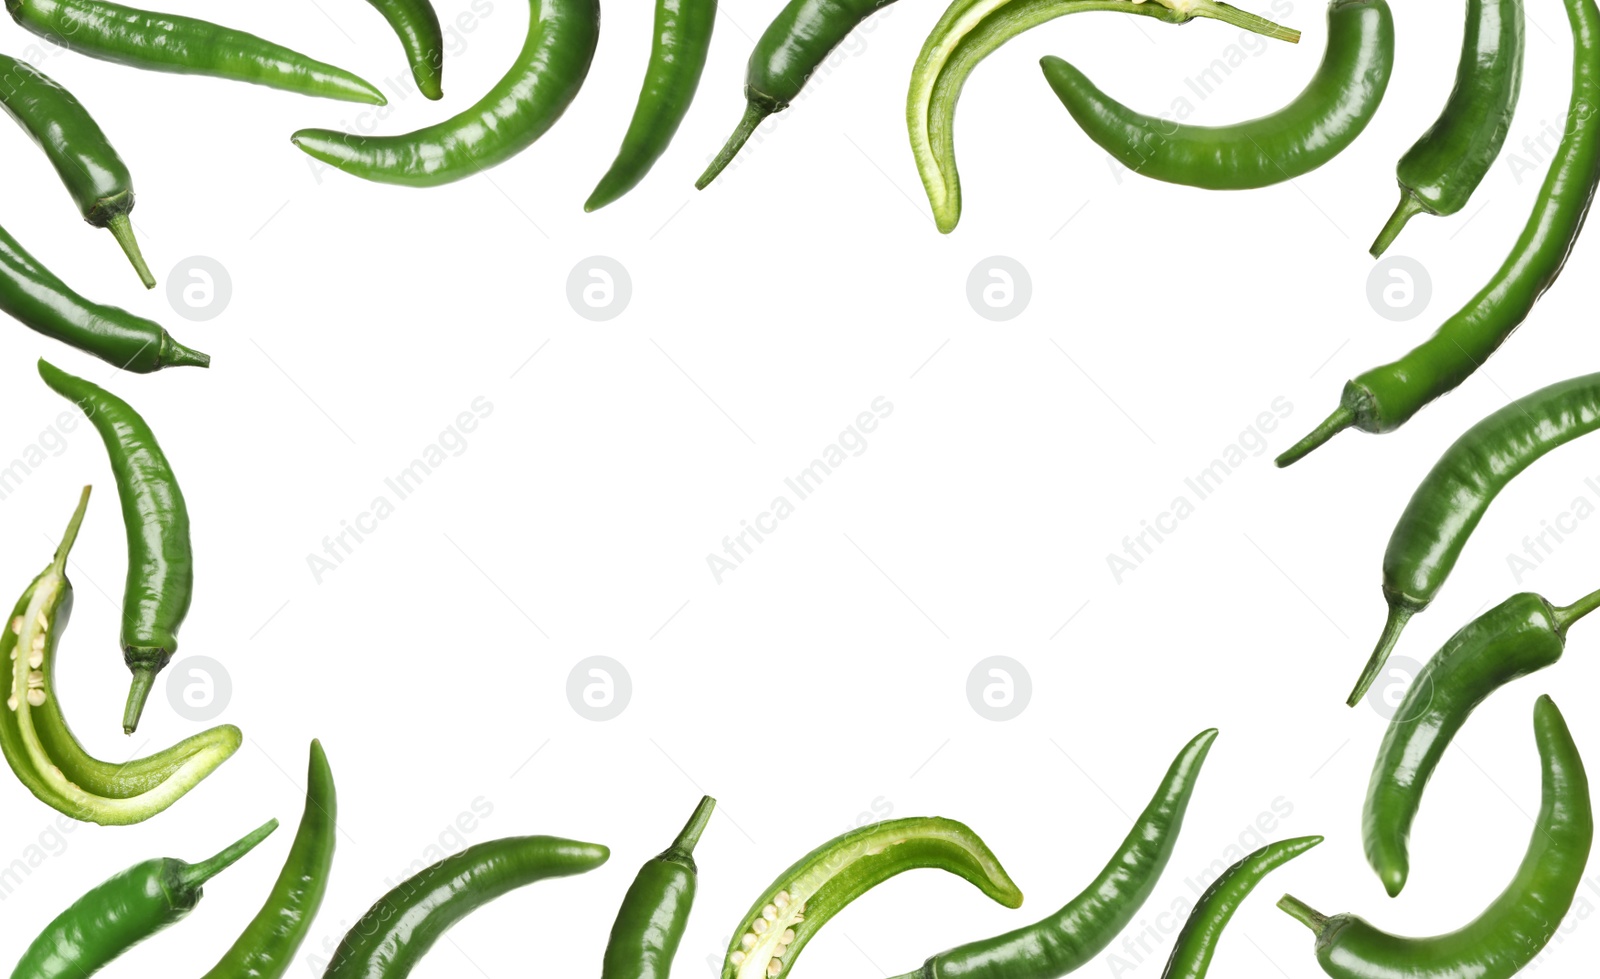 Image of Frame madegreen chili peppers on white background 